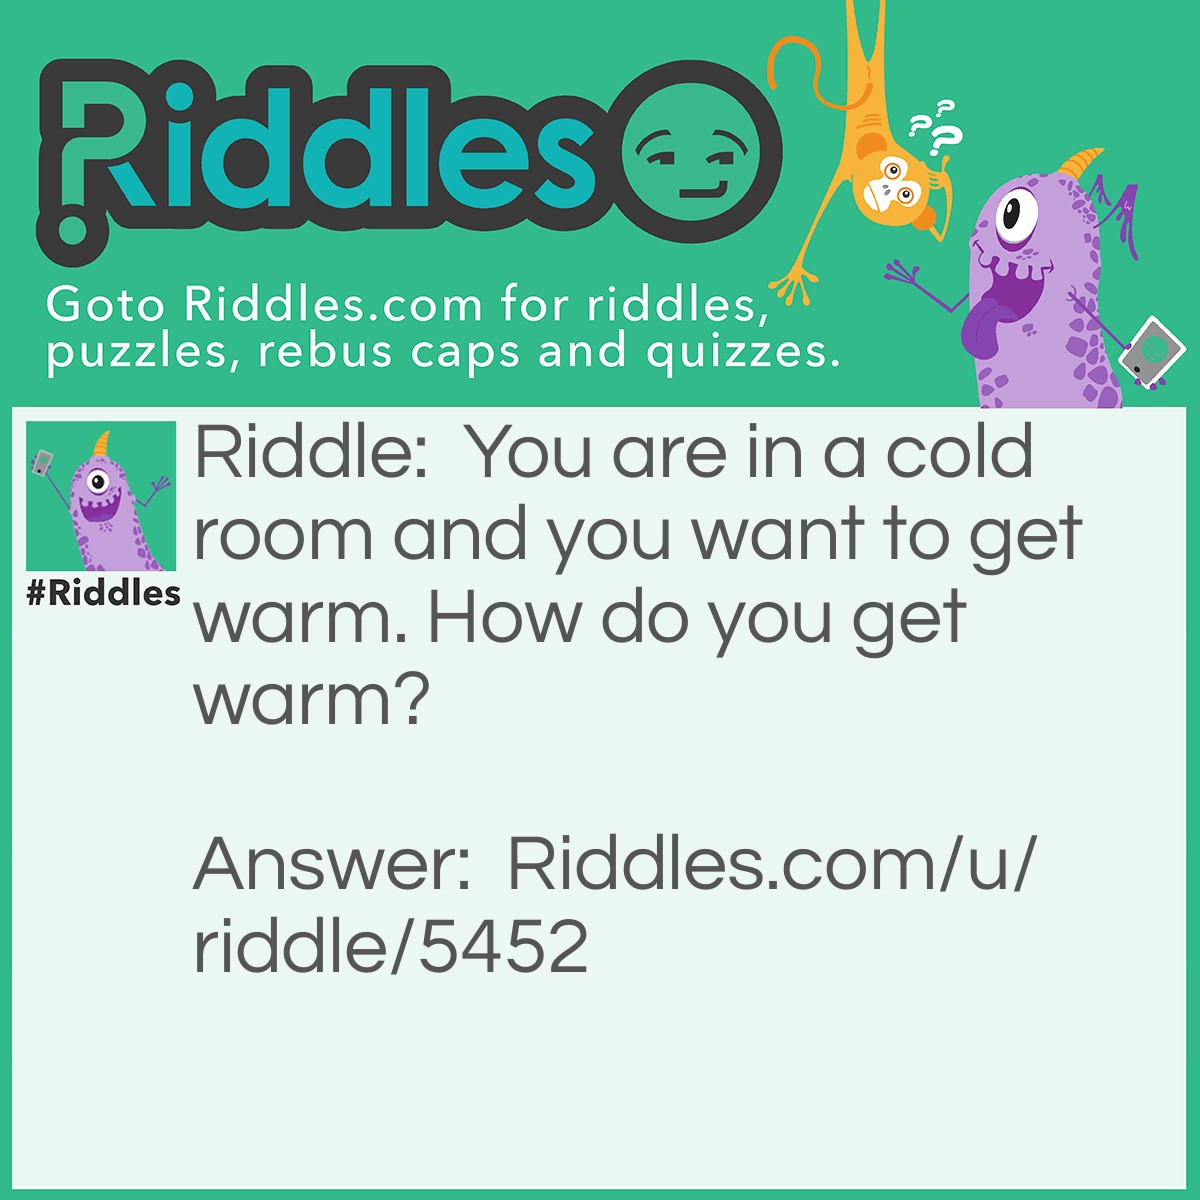 Riddle: You are in a cold room and you want to get warm. How do you get warm? Answer: Go into the corner. It's always 90 degrees.